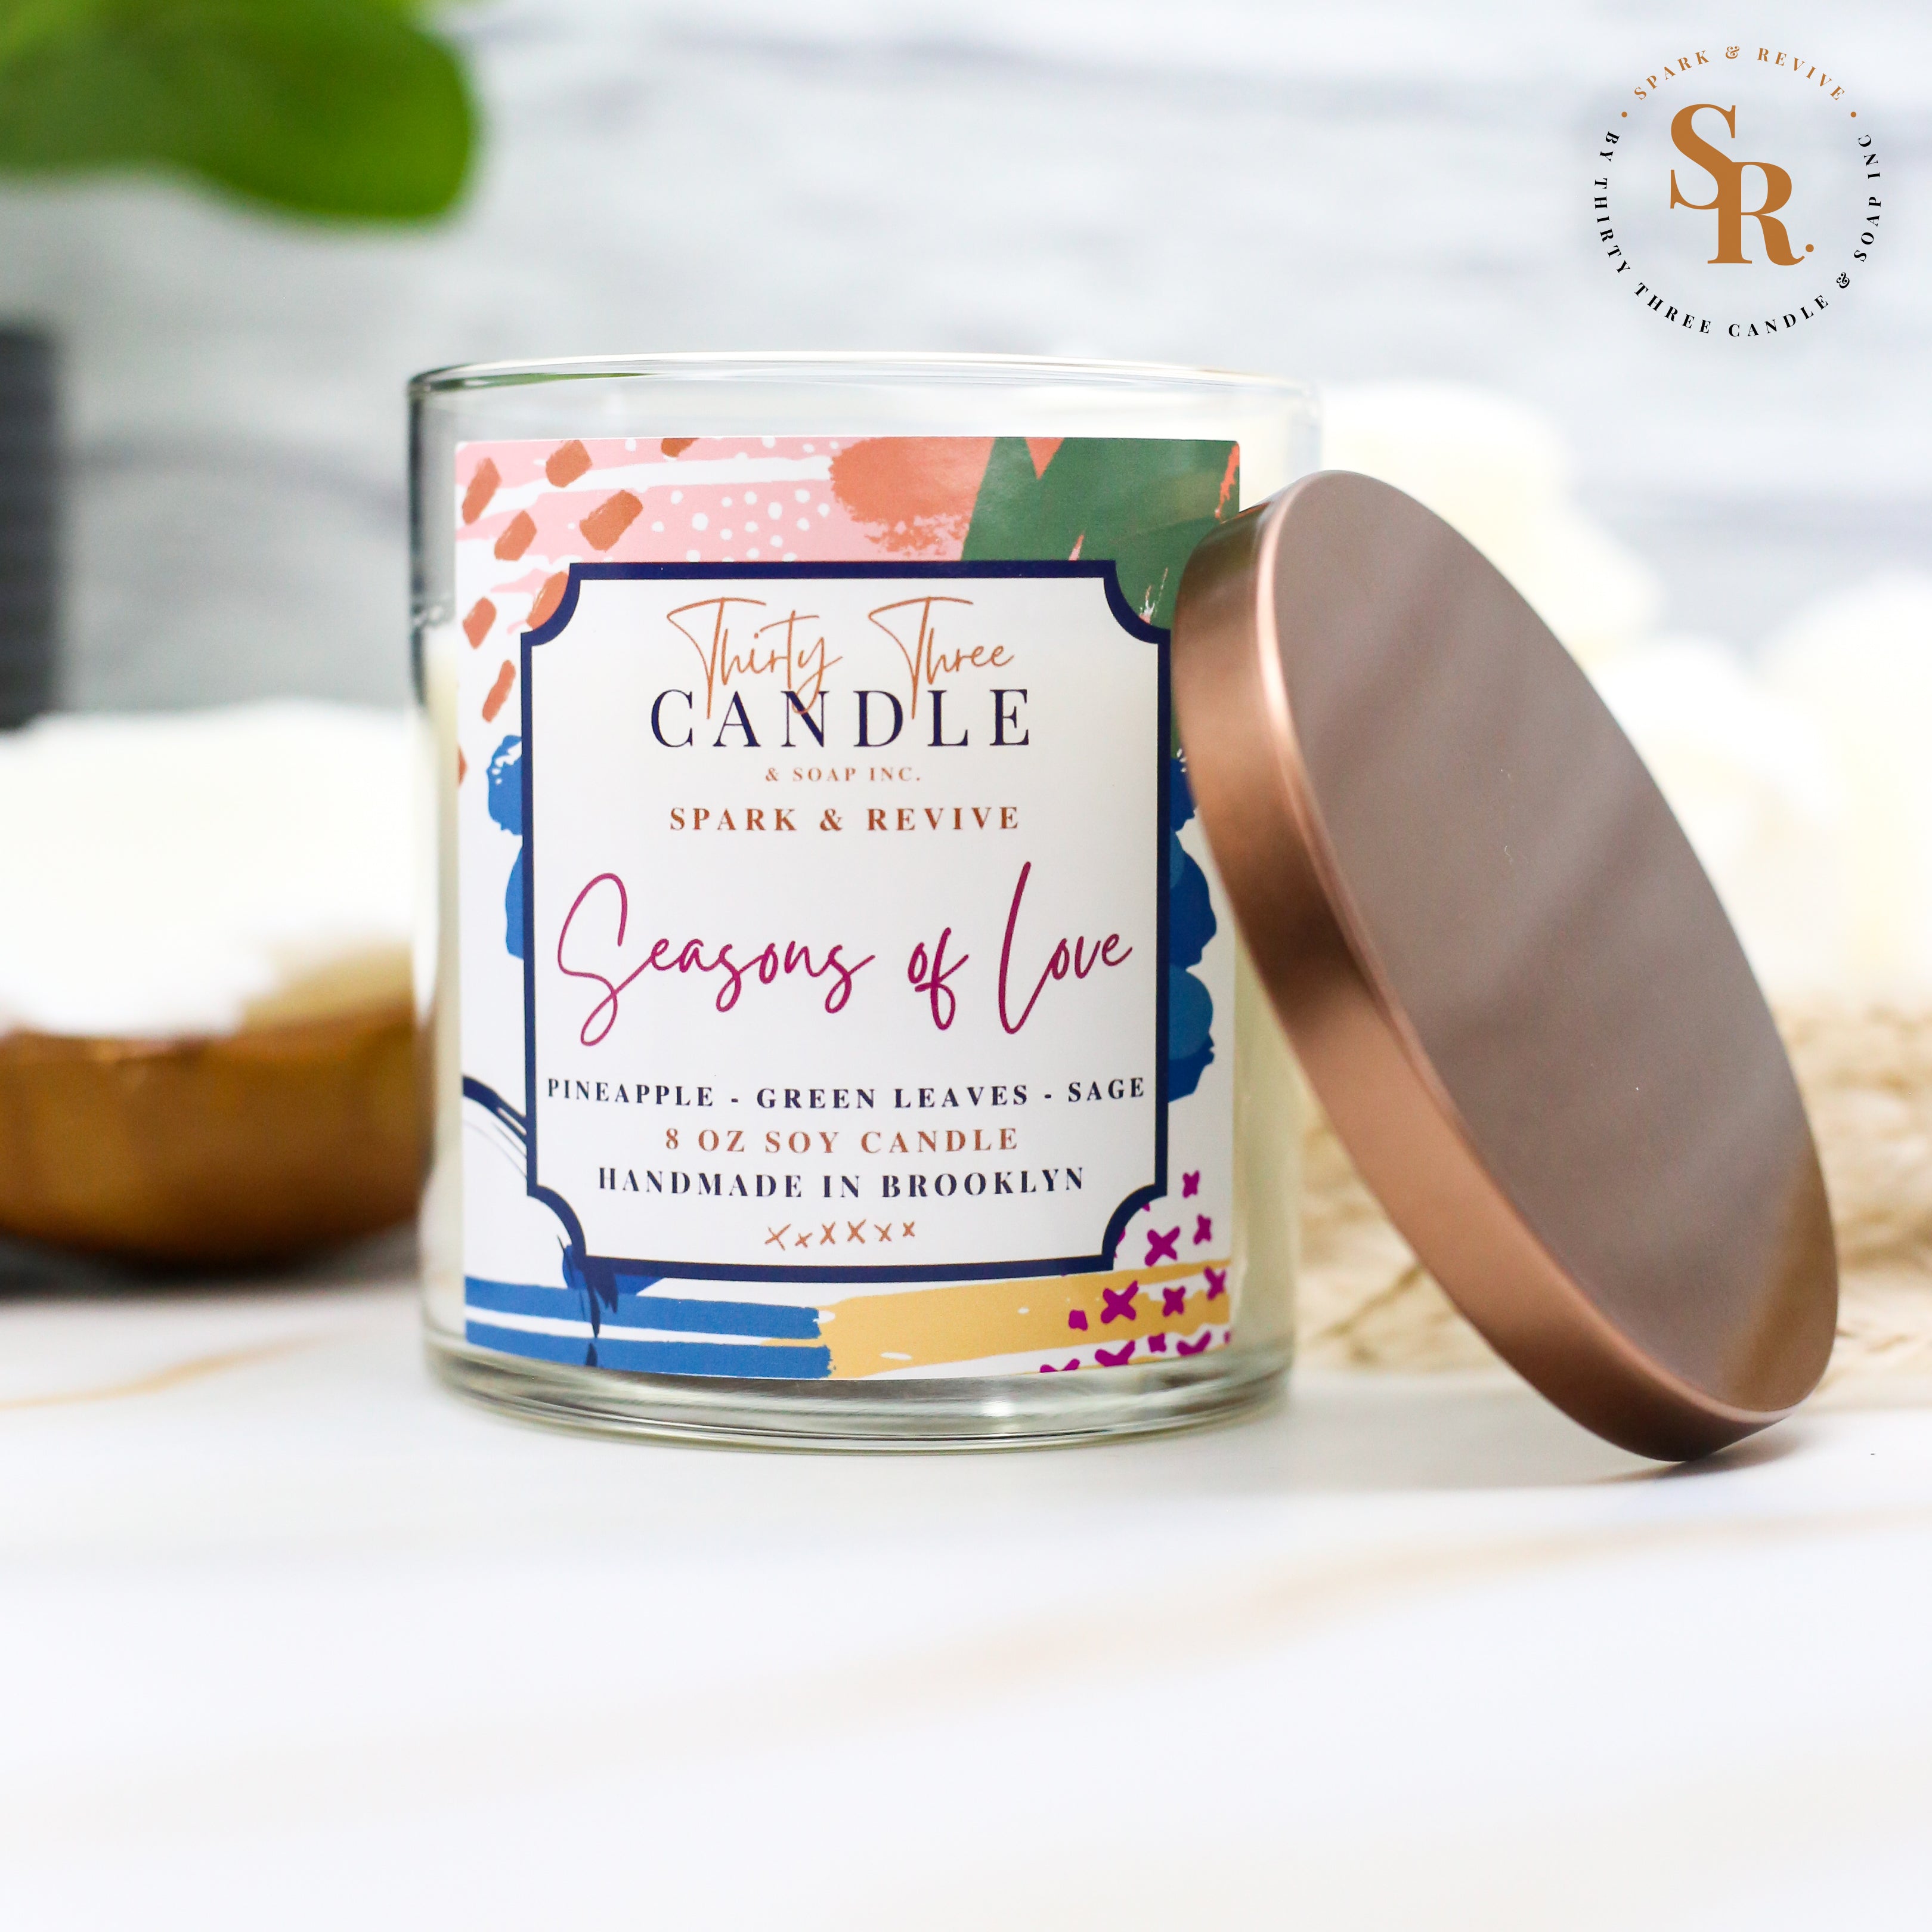 Uplift your mood and awaken your senses with our Seasons of Love scented soy candle. Seasons of Love is a sweet but not overwhelming blend of pineapple, sage, and green leaves. It is sure to put you in good spirits and bring love to your day. Seasons of Love is infused with natural essential oils, including eucalyptus, cedar, vetiver, palmarosa, clary sage, lemongrass, amyris, black pepper, cade, and blue chamomile flower. @SparkandRevive